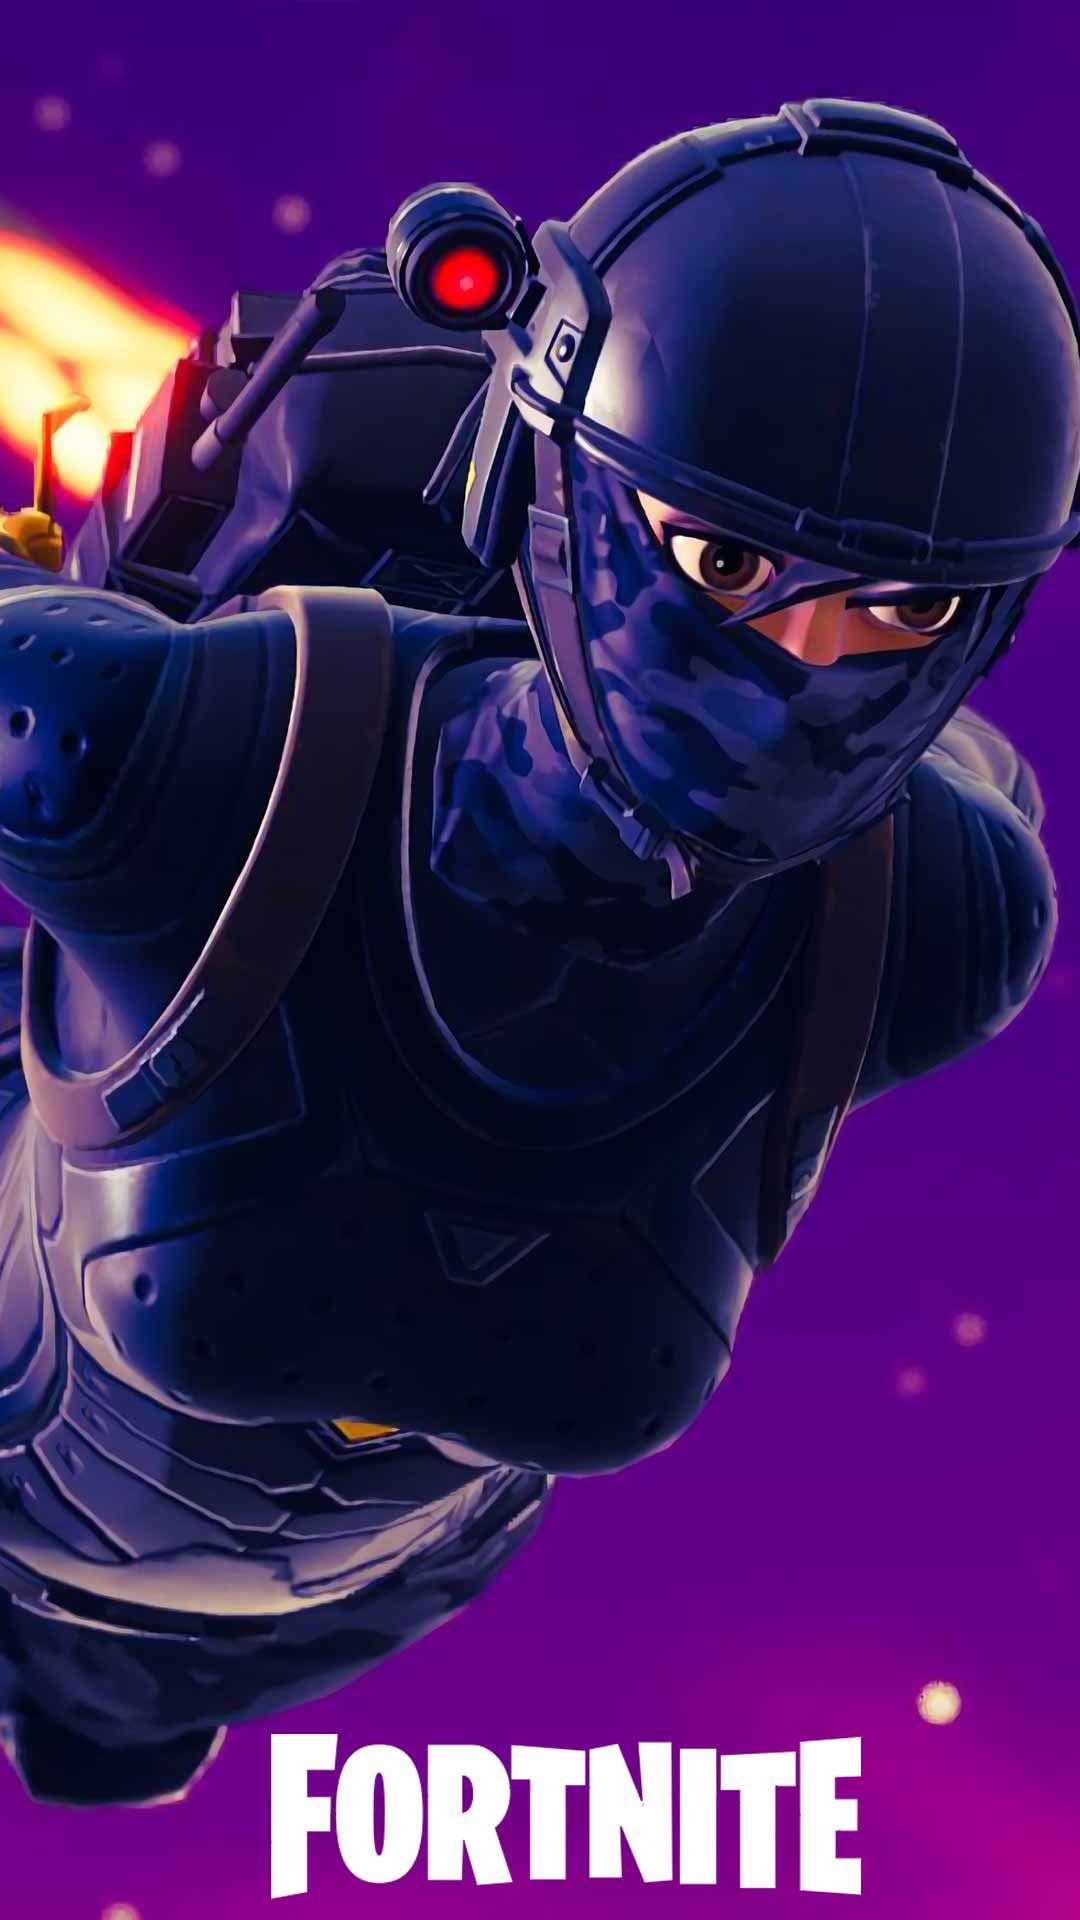 Fortnite wallpaper HD phone background for iPhone android lock screen. Characters Skins art. Best gaming wallpaper, Gaming wallpaper, Fortnite